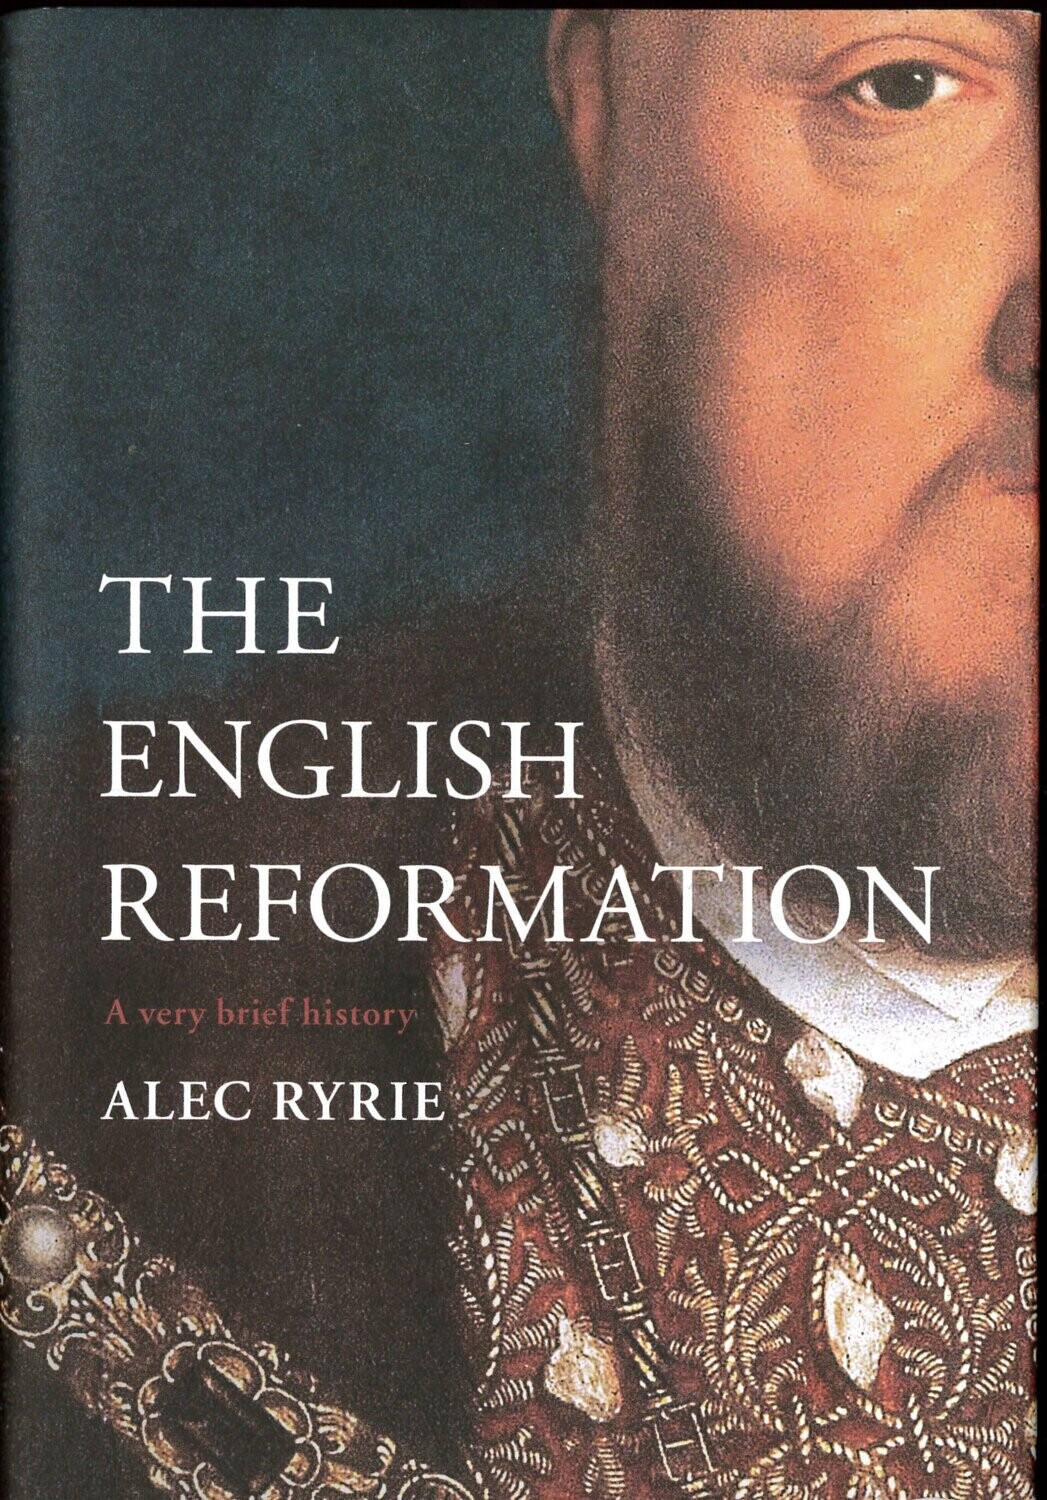 The English Reformation: A very brief history